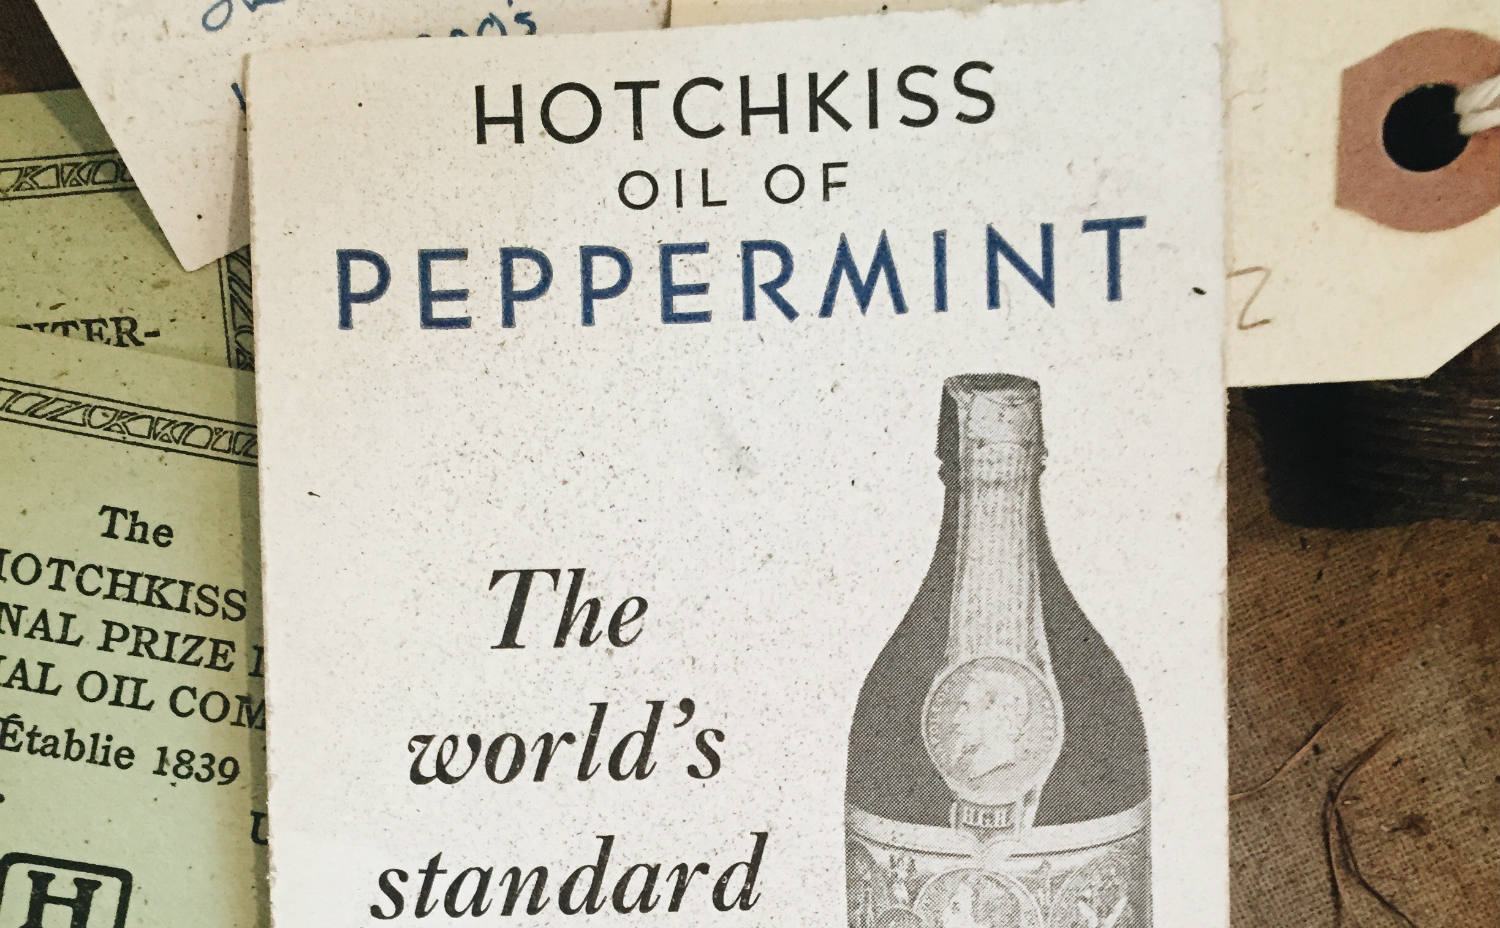 Hotchkiss Peppermint Oil - Featured Image